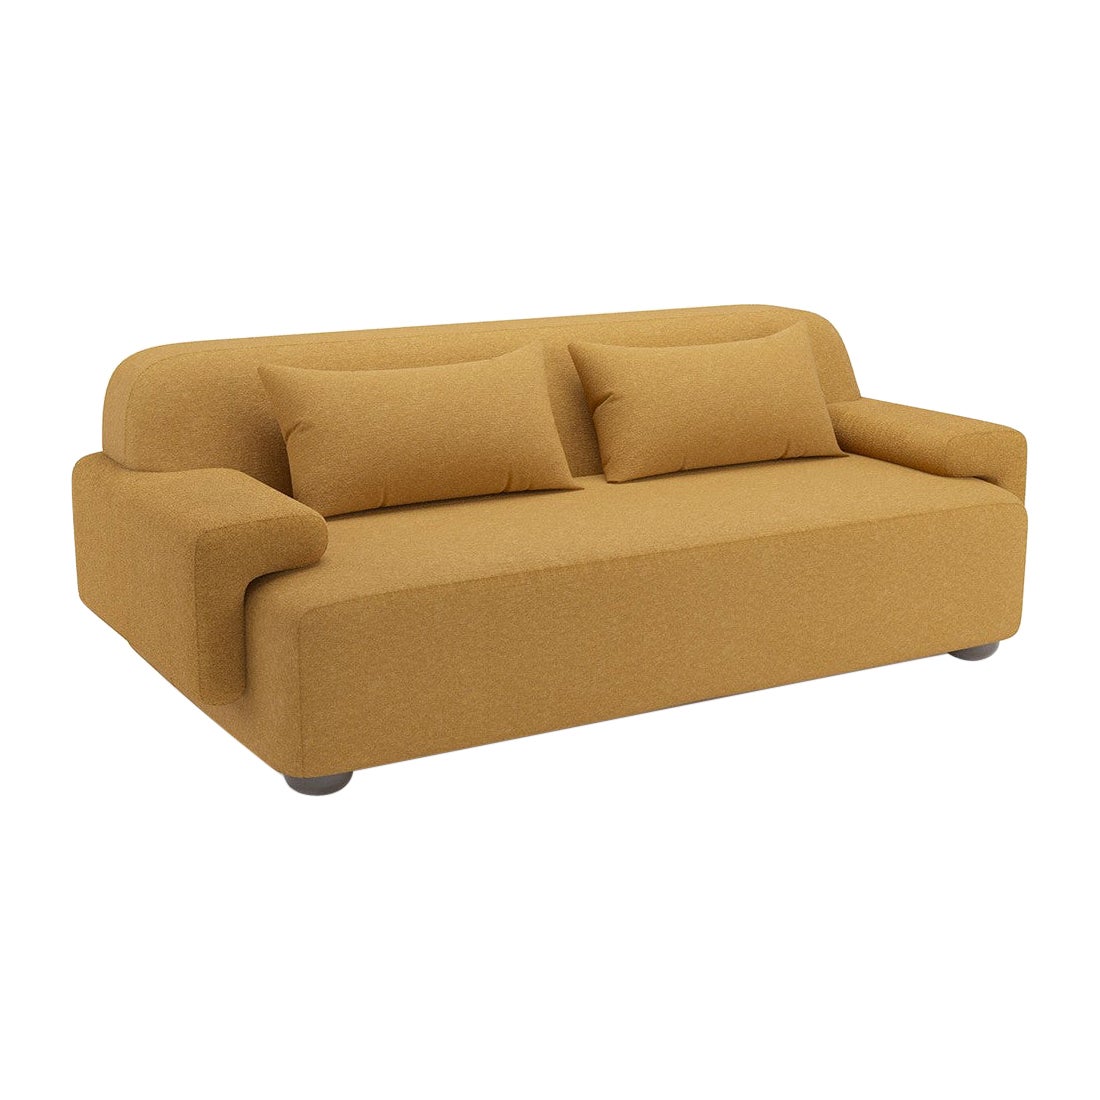 Popus Editions Lena 2.5 Seater Sofa in Curry Cork Linen Upholstery For Sale